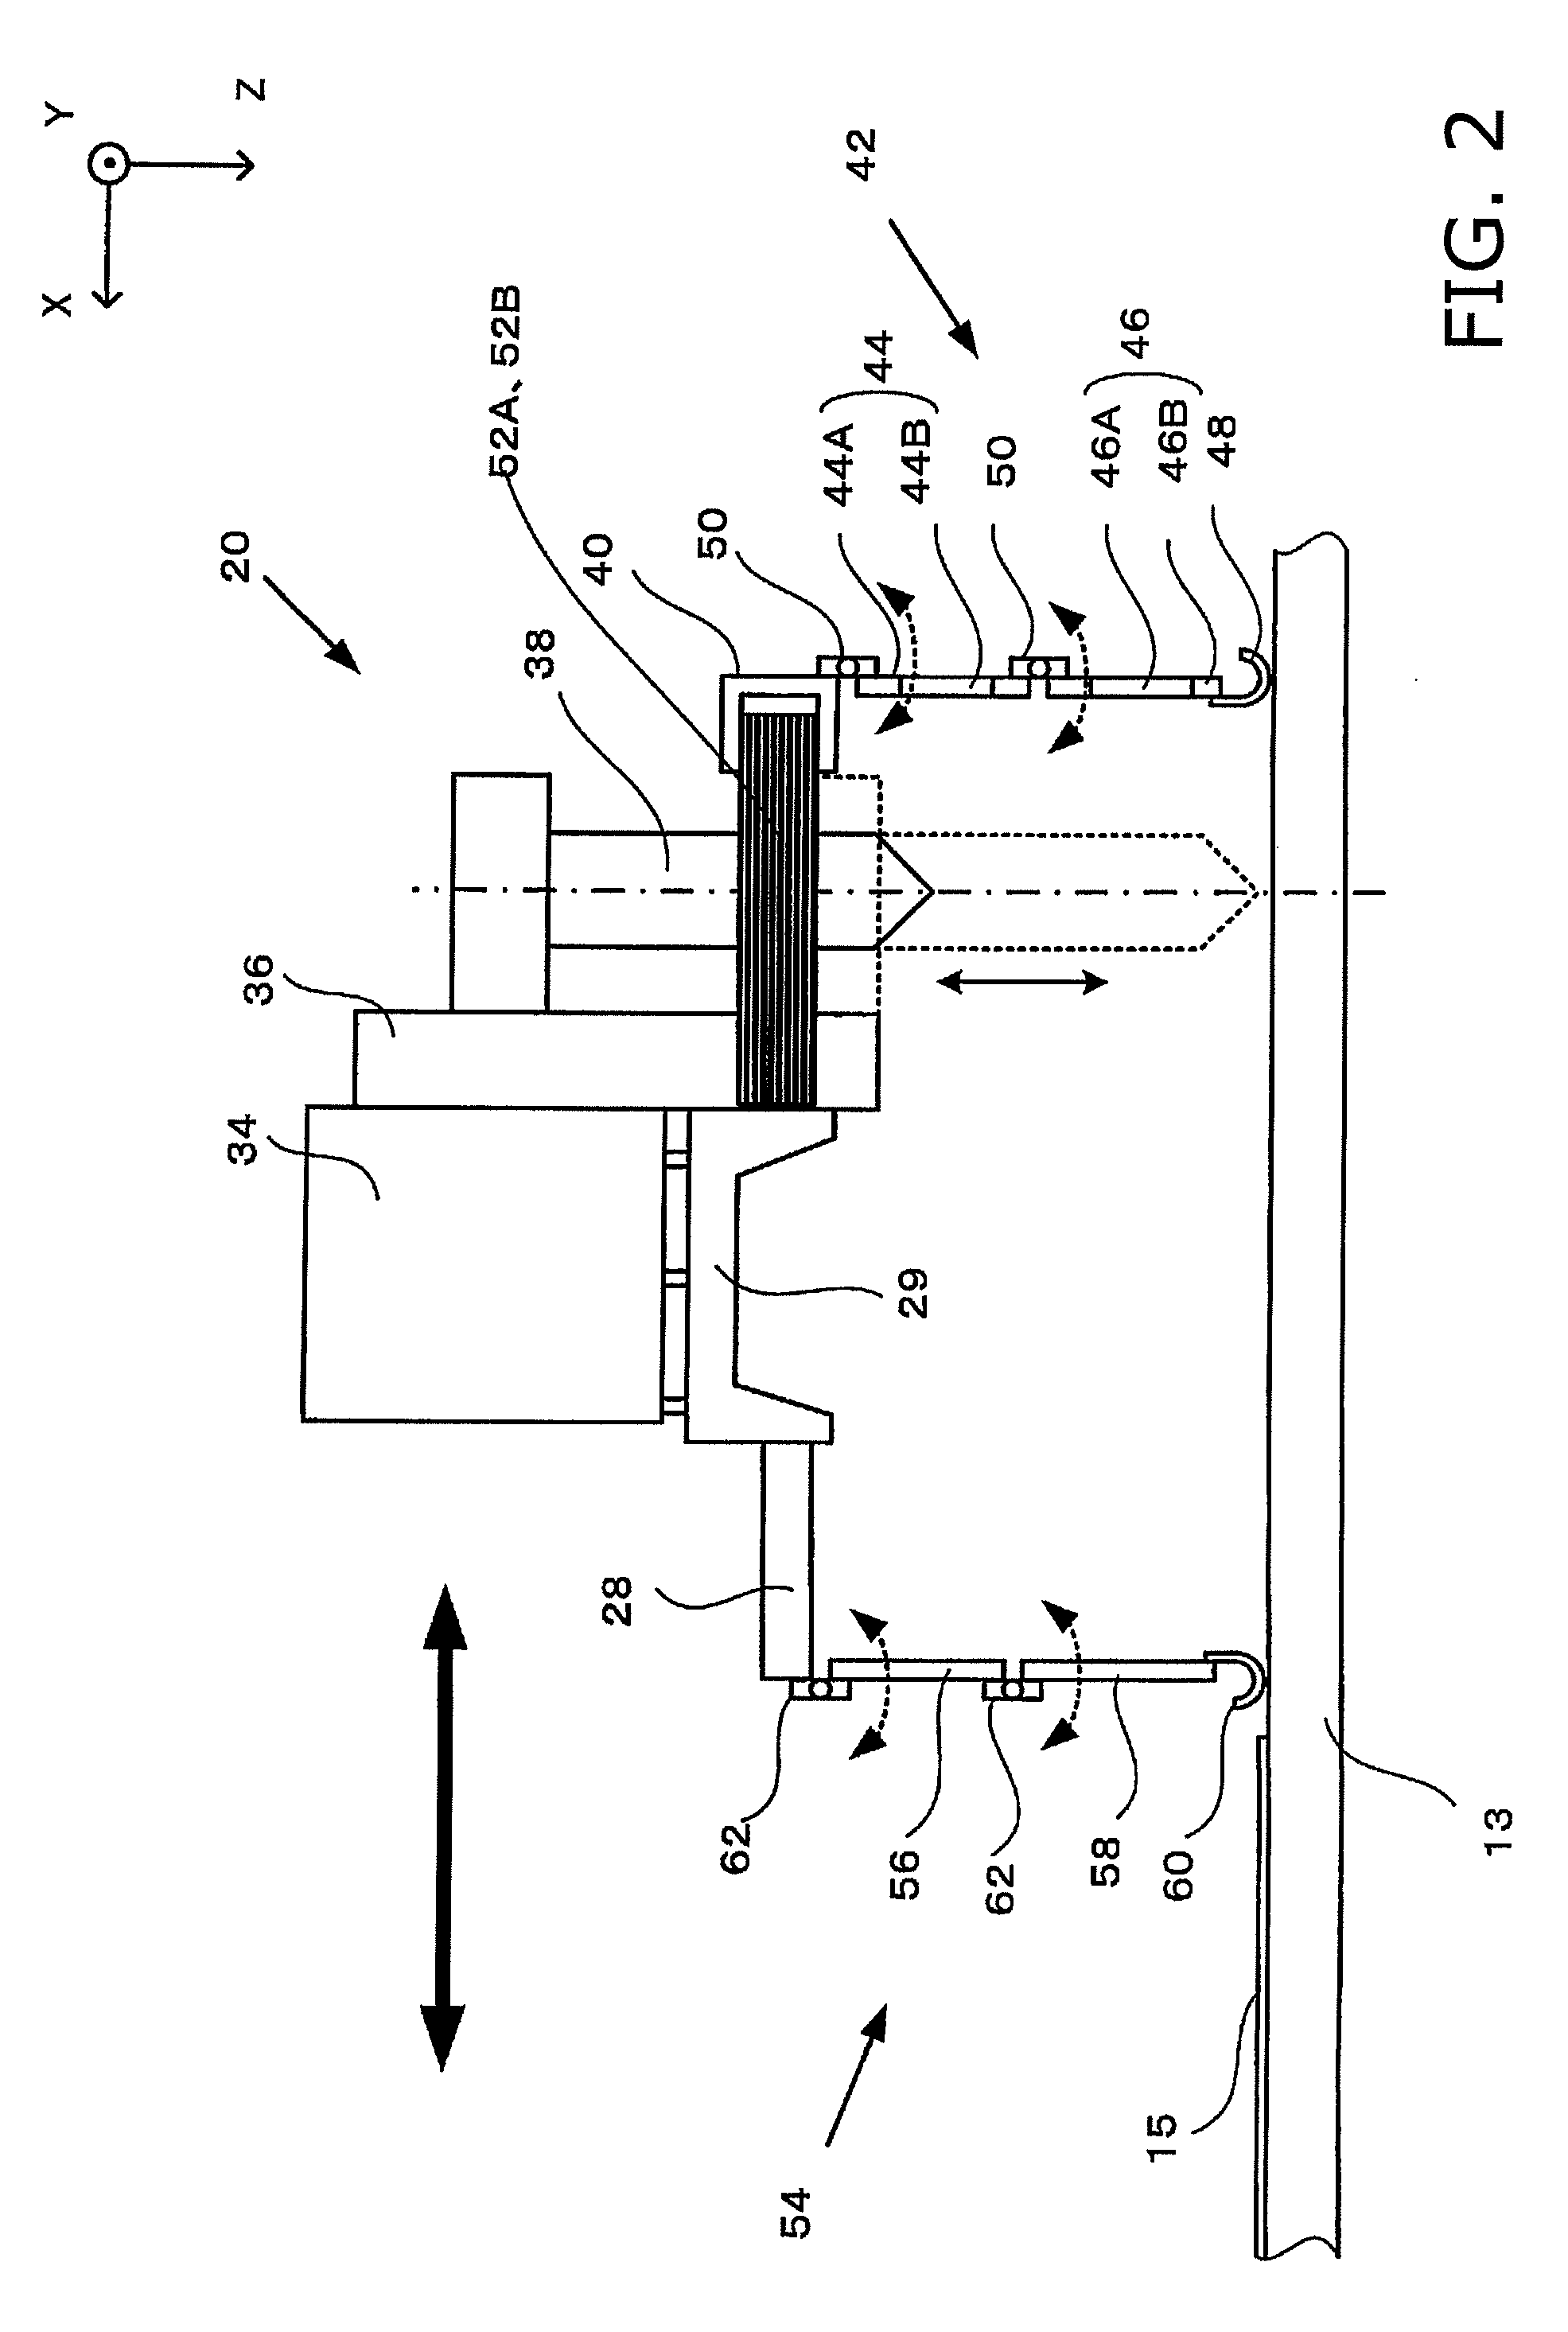 Thermal cutter with sound absorbent walls